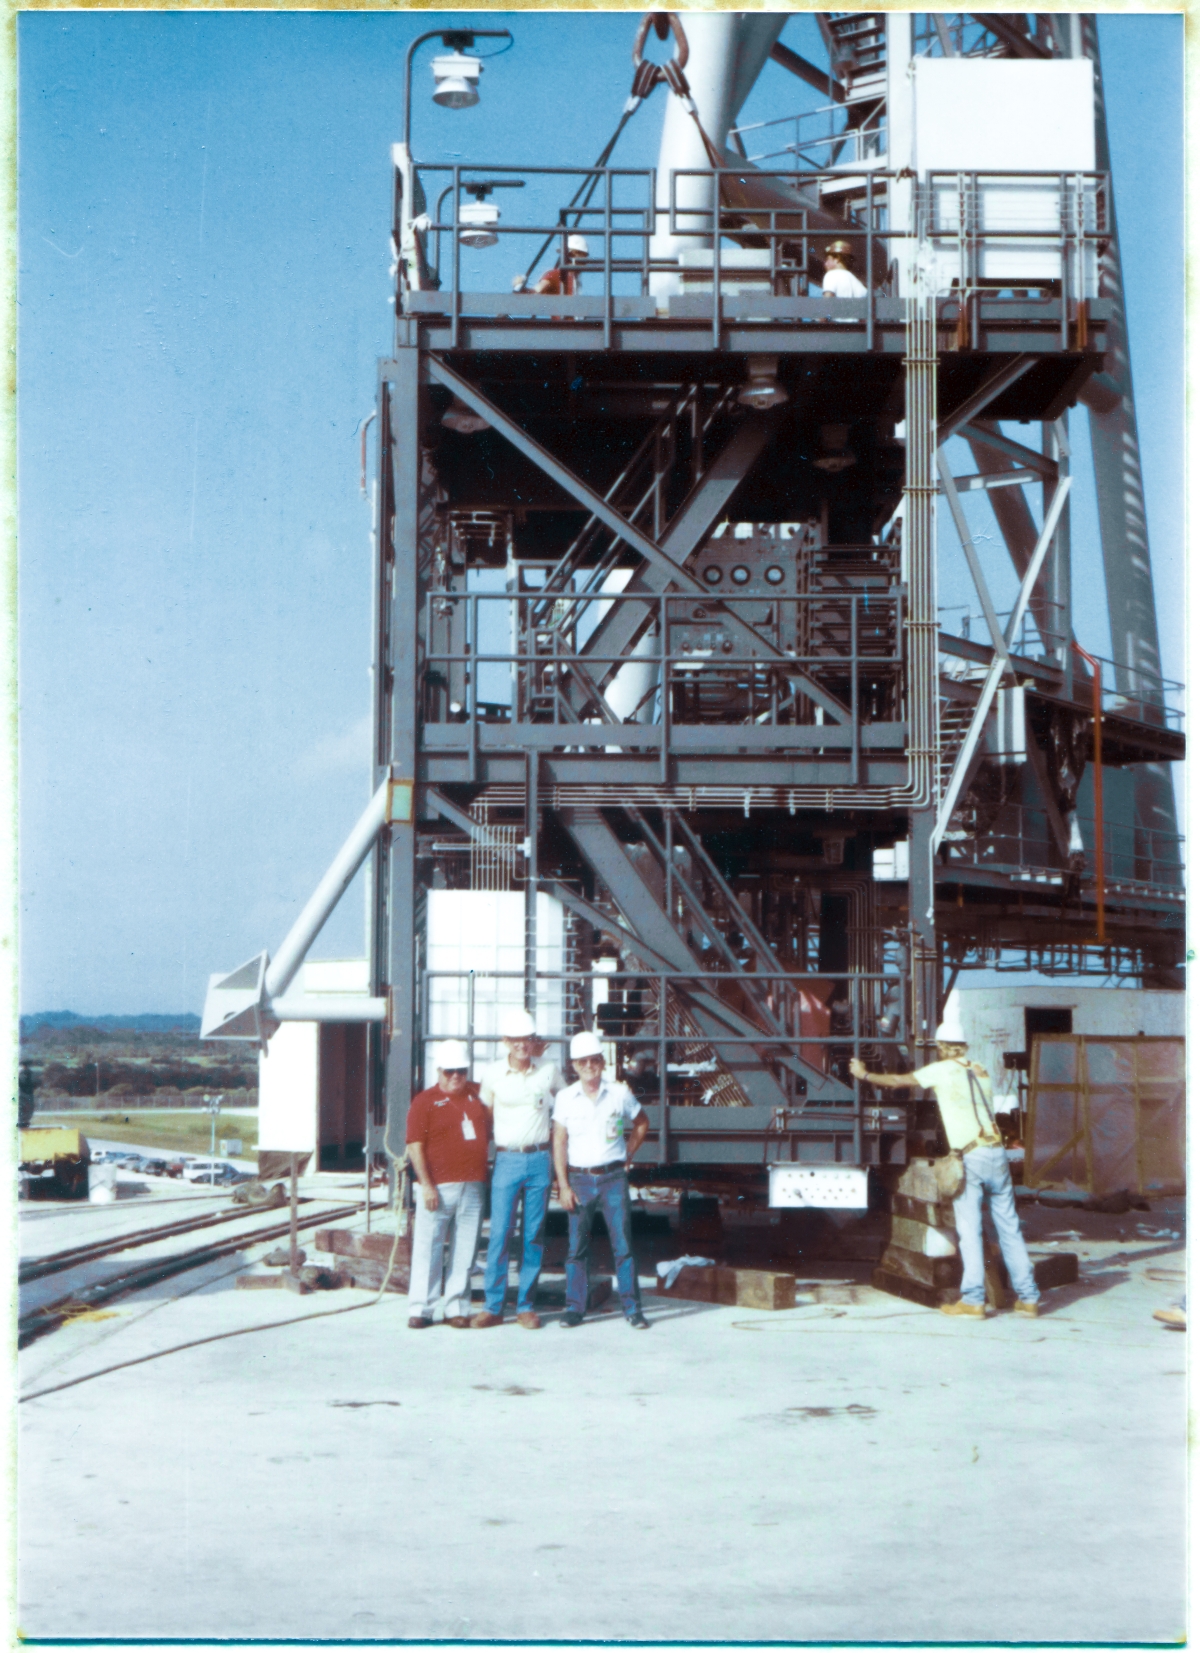 Image 086. The OMBUU. The Orbiter Mid-Body Umbilical Unit, sitting on the Pad Deck at Space Shuttle Launch Complex 39-B, moments prior to being lifted into place, high above, flush against the face of the RSS. Standing in front of it, shoulder-to-shoulder like the Three Musketeers, left-to-right, Howard Baxter, Wade Ivey, and Hank Morgan smile widely, thoroughly enjoying a momentary breather from the high-stress demands of their intimate involvement with yet another dangerous and high-stakes operation which is just about to get underway, provided by James MacLaren making a silly remark to them an instant before hitting the shutter release on his camera. To their right, back to camera, Rink Chiles' brother Rayburn, another Union Ironworker from Local 808, leans against the corner of the OMBUU, which is still sitting on temporary support cribbing, getting ready to feel it come alive and go into weightless motion, and steadying himself against any drift which the OMBUU might take once it goes fully into suspension and breaks free of the ground. Up on top of the OMBUU, another pair of, unknown alas, Union Ironworkers prepare to take the stairs down to the lowest level and get off of it, following fine adjustment and close inspection of the four-legged lifting sling which will be what carries it aloft, and which is already in tension. The OMBUU is a ferociously-complex and potentially explosive piece of equipment, and its main job is to pump Liquid Hydrogen and Liquid Oxygen at unimaginably-cold temperatures into the Dewars beneath the Orbiter's Cargo Bay which will store them as consumables for the entire duration the Shuttle remains on orbit. Photo by James MacLaren.